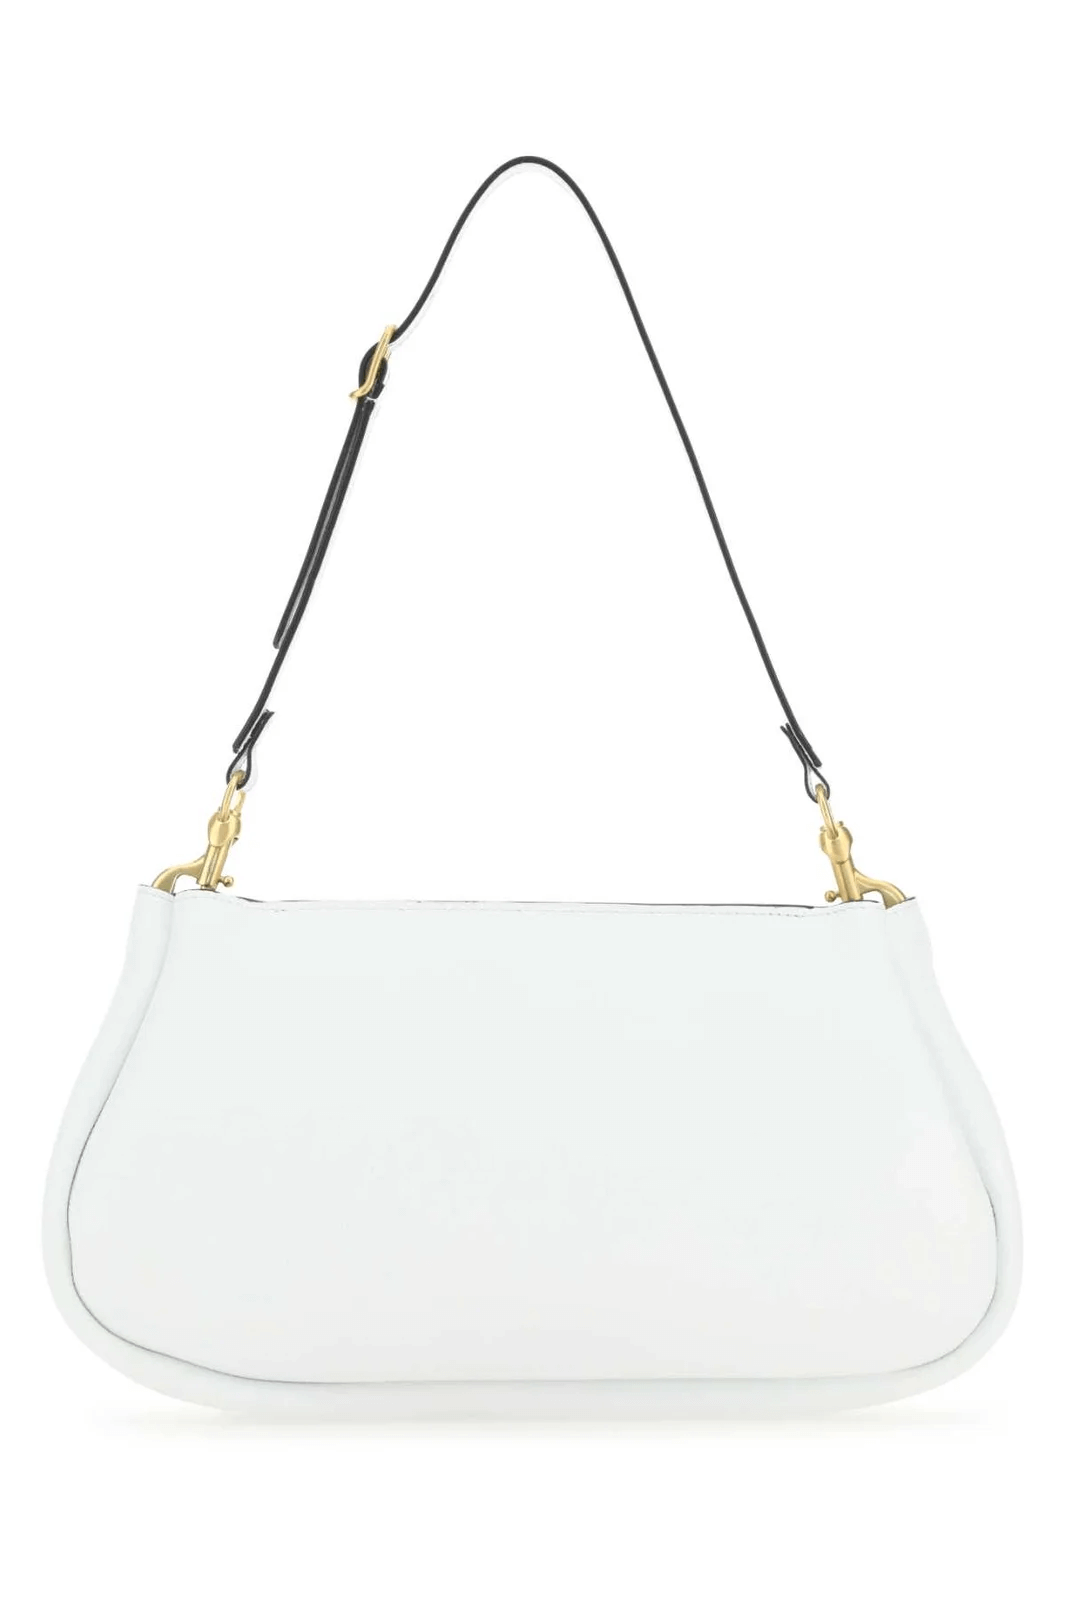 Chloe Marcie Shoulder Clutch Bag in White available at The New Trend